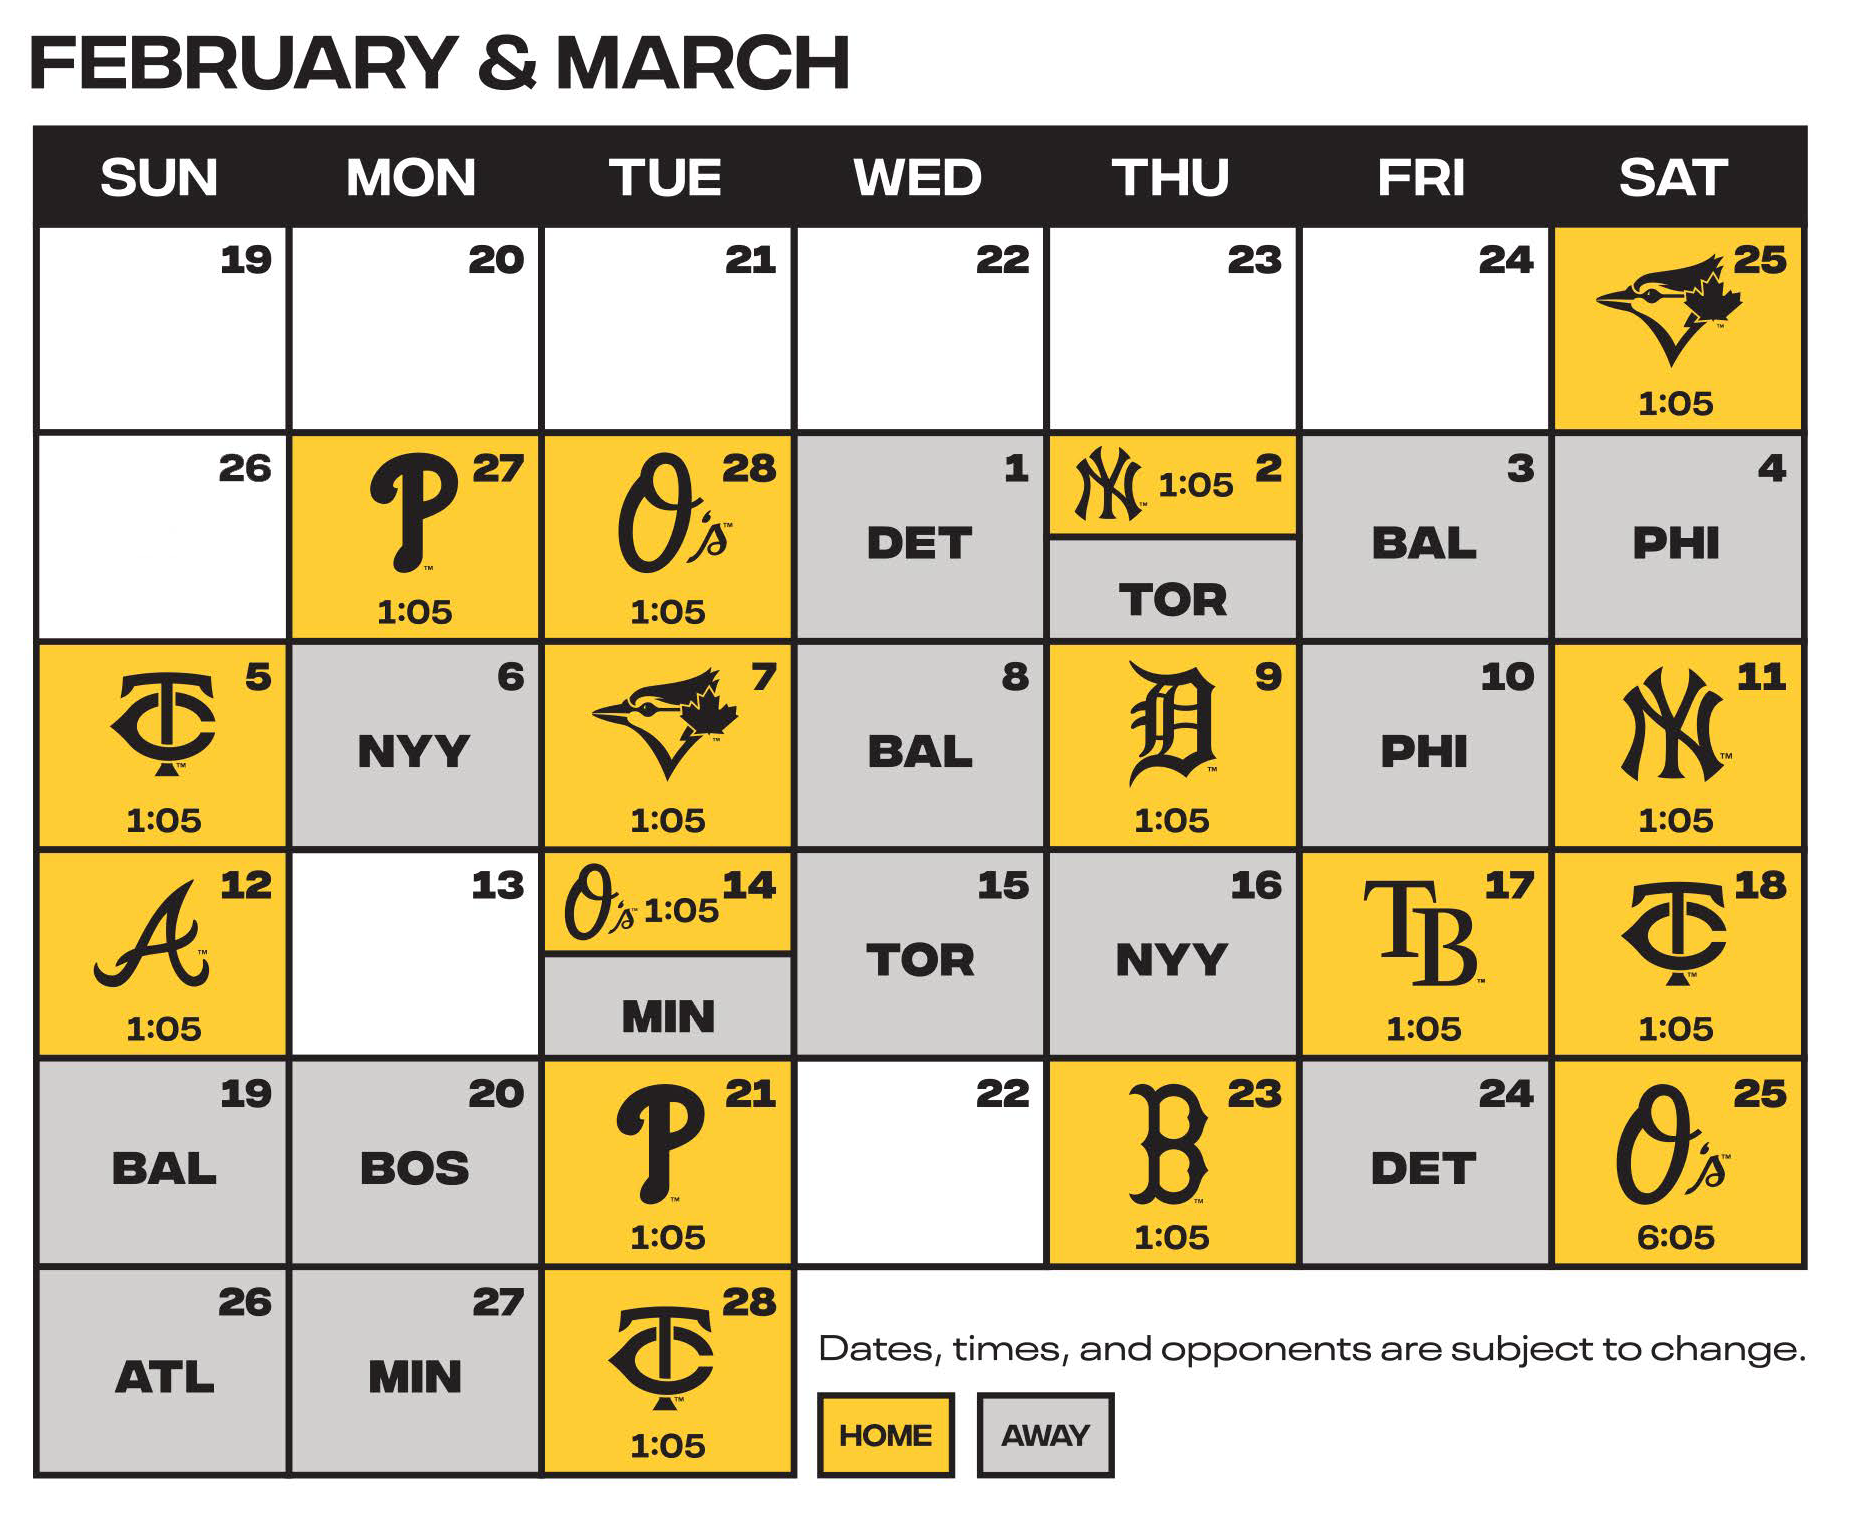 Pirates announce 2023 spring training schedule